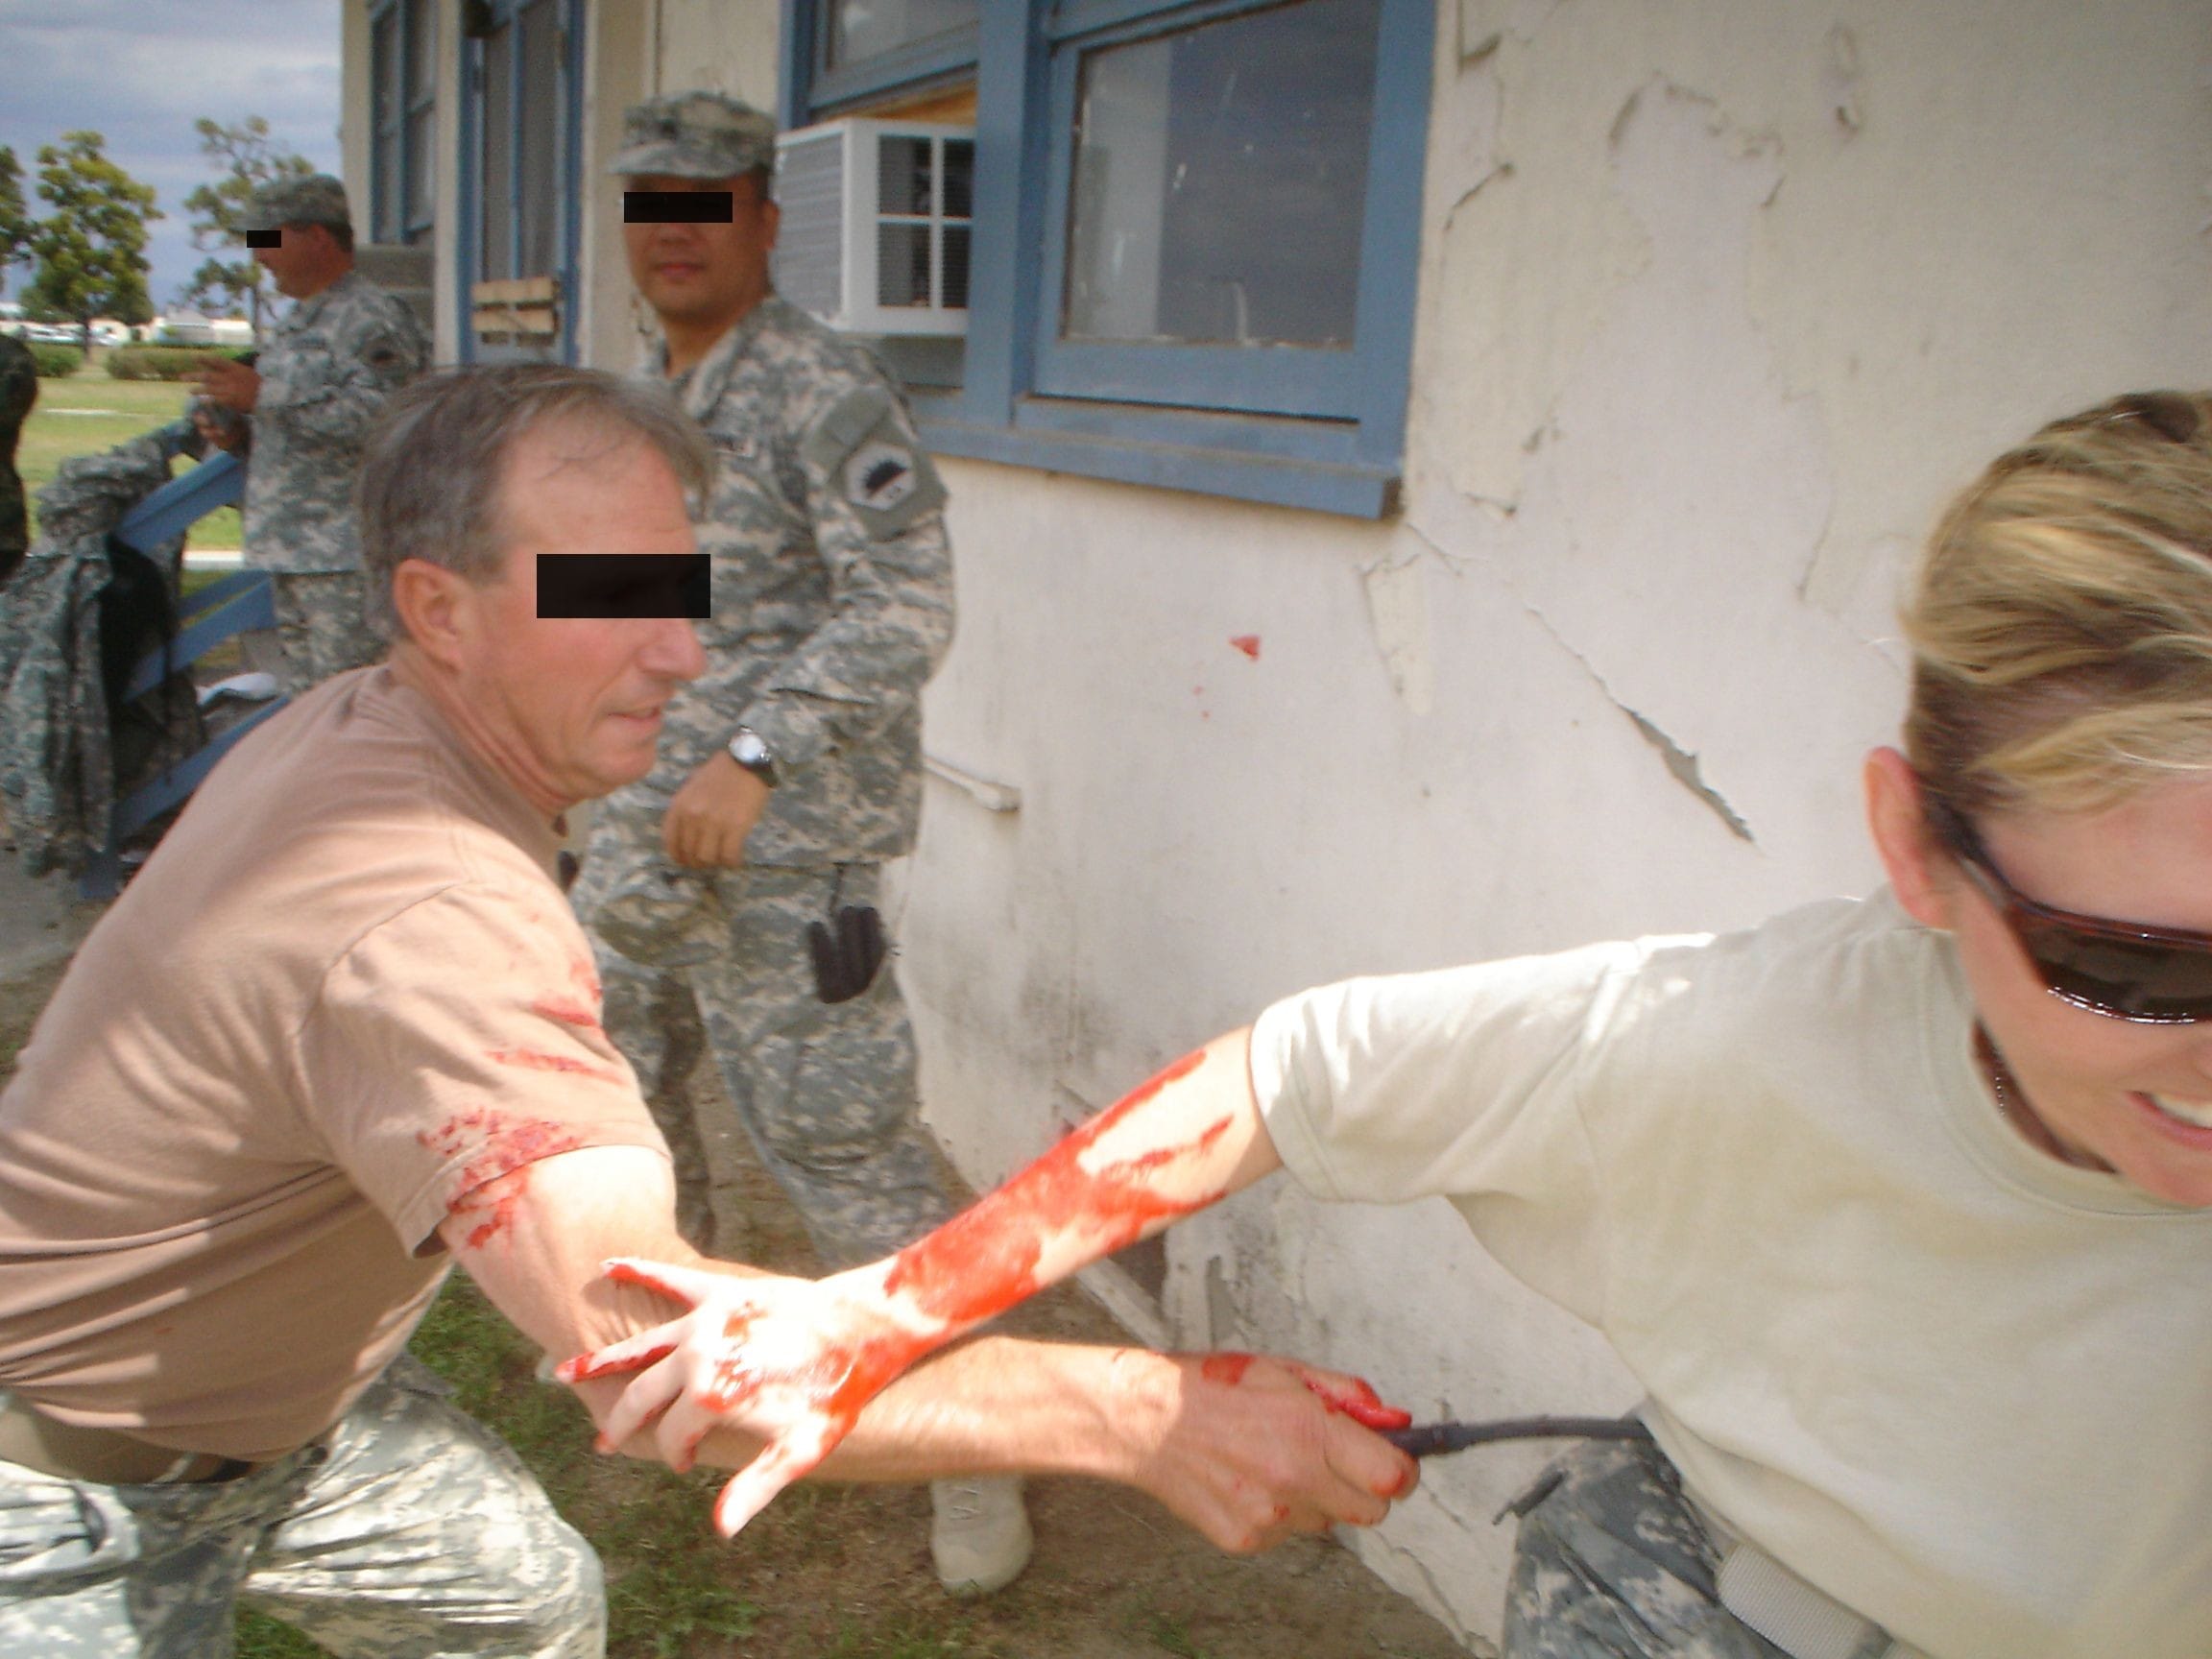 Jim taught these two soldiers Knife Combat in a confined space using Hollywood stage blood for maximum realism. He taught many Knife Combat courses.